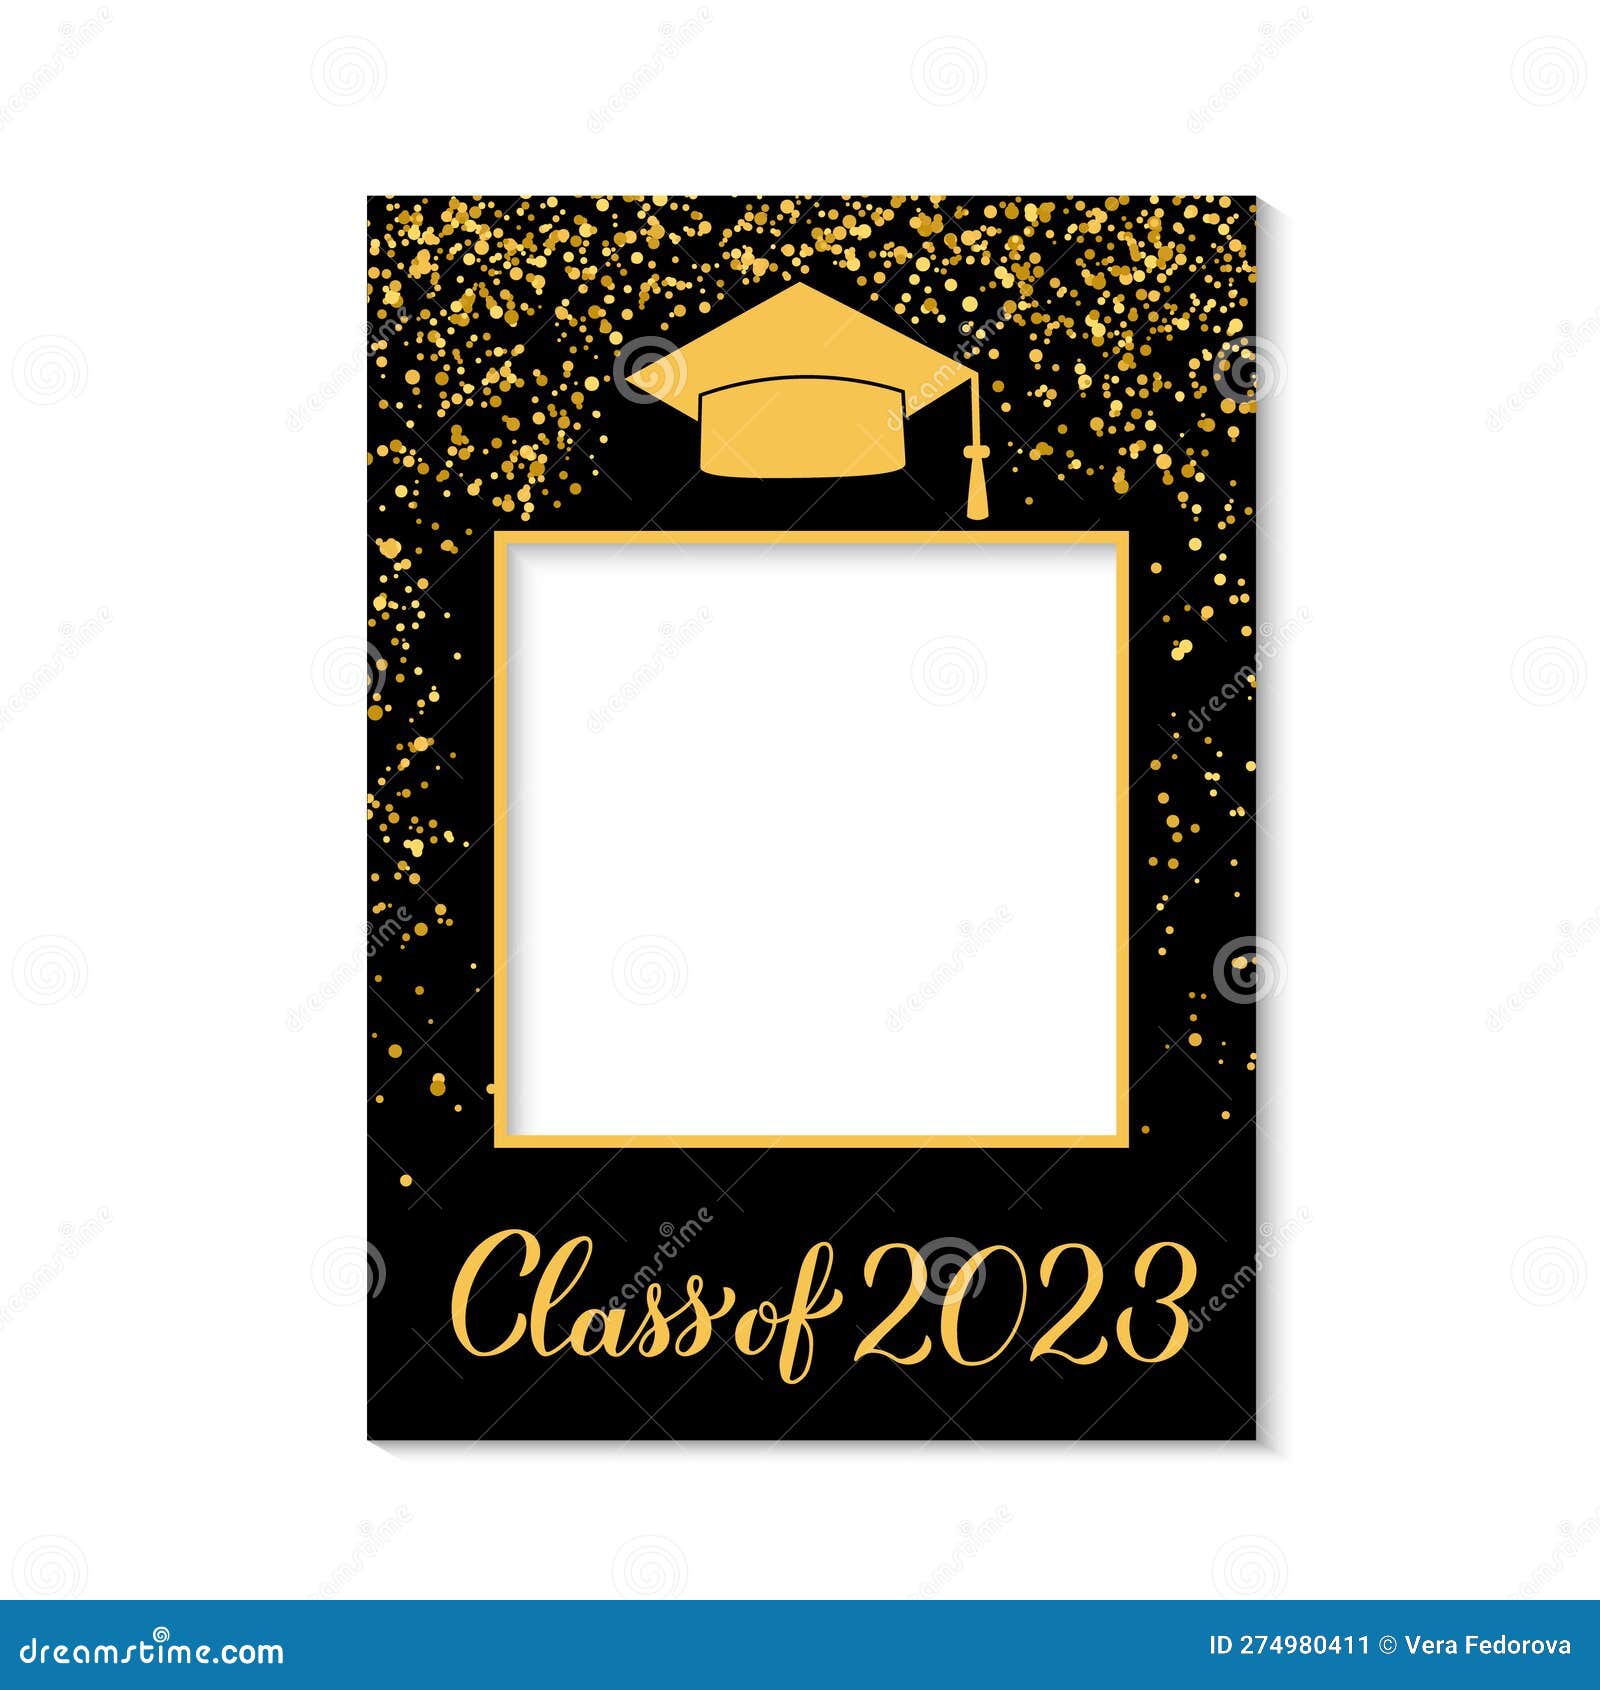 Class of 2023 Photo Booth Frame Graduation Cap Isolated on White ...